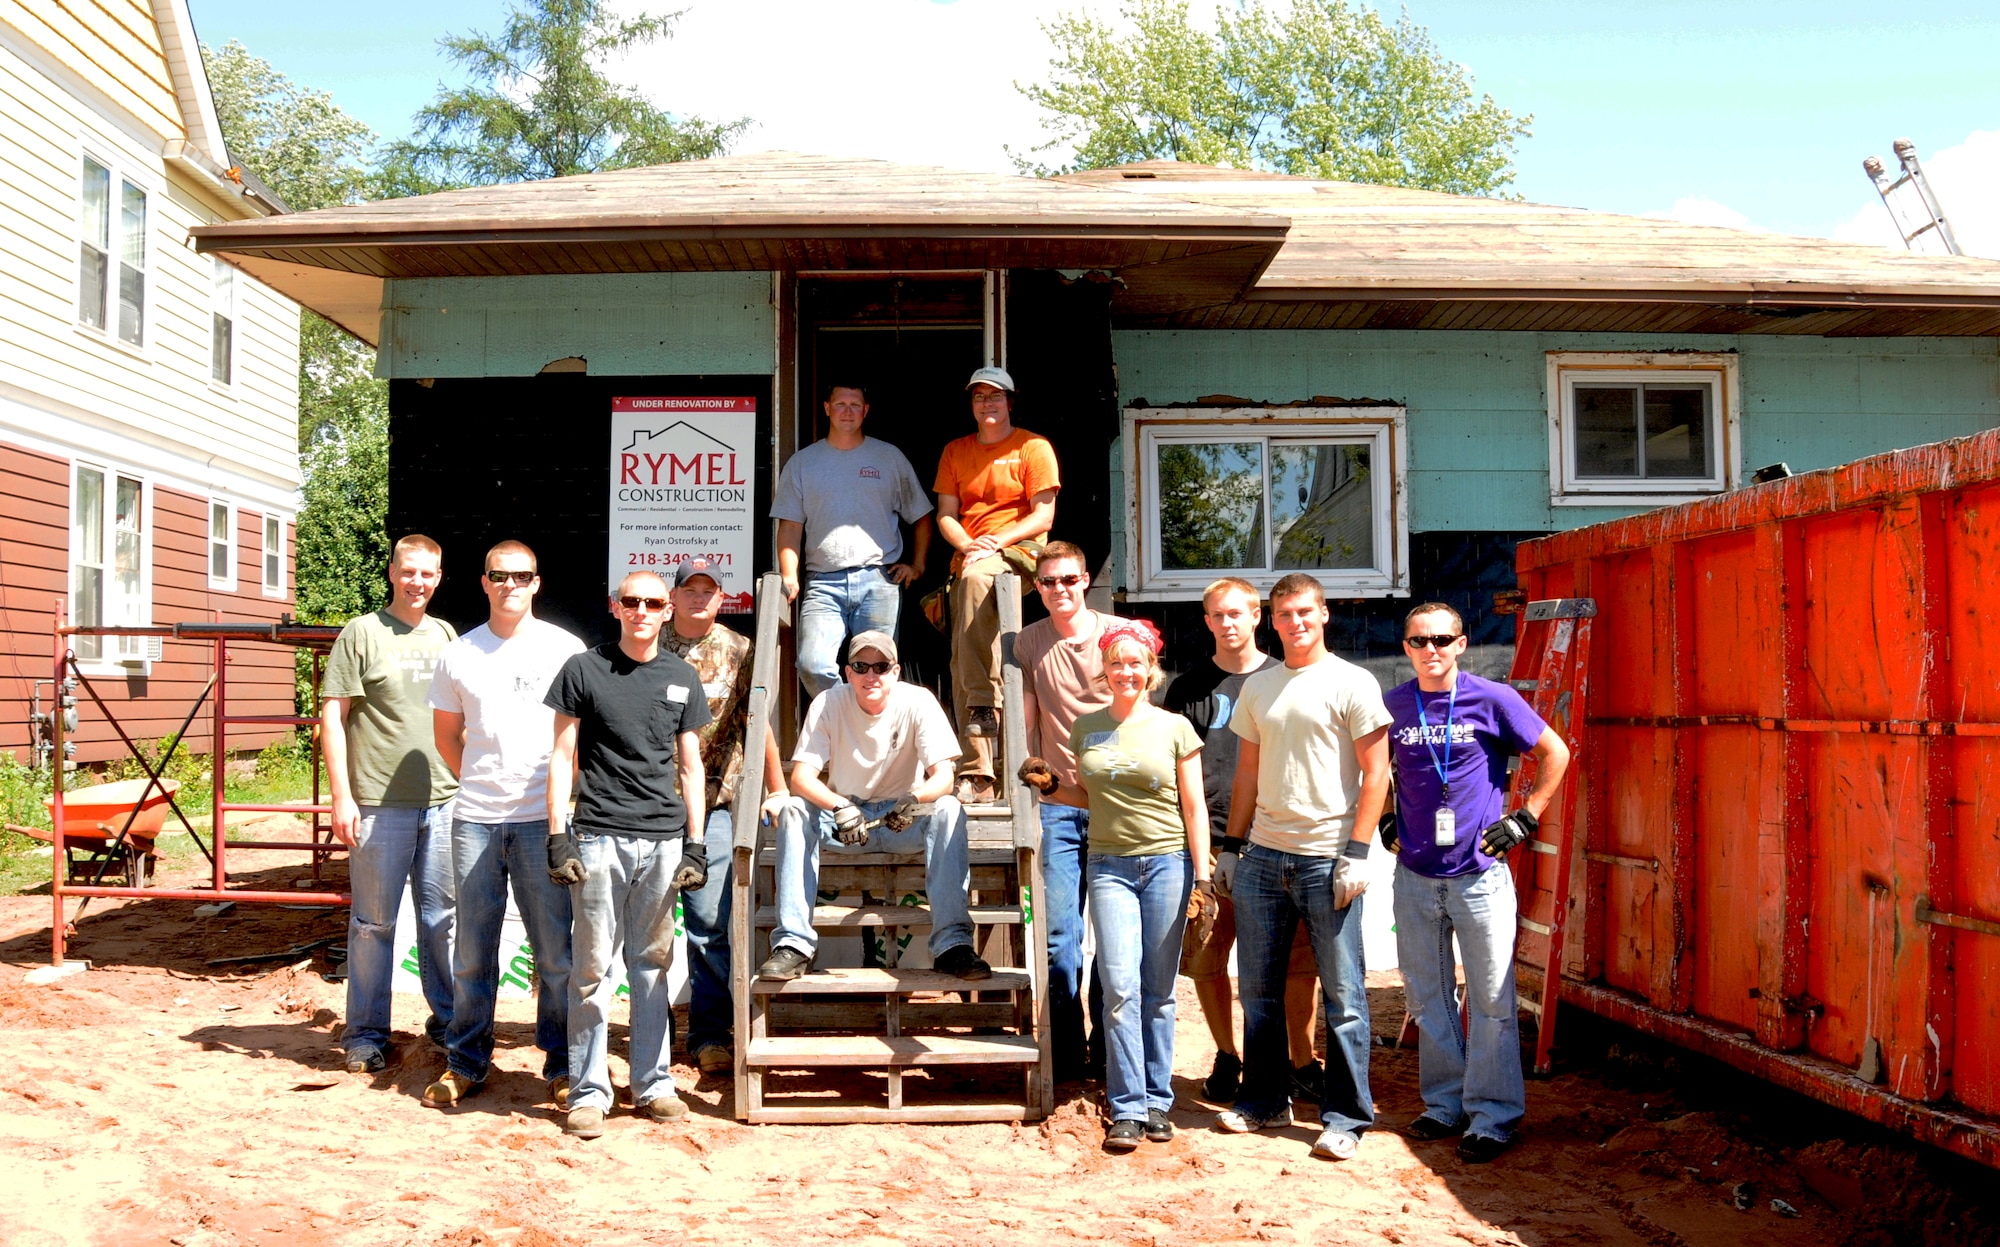 Members of the 148th Fighter Wing pose for a photo while volunteering to help Habitat for Humanity  remodel a house in Superior Wis., Saturday, Aug. 4, 2012.  Approximately 12 Bulldogs assisted with the construction, which ranged from extensive roof construction and new siding. (National Guard photo by Tech. Sgt. Scott G. Herrington